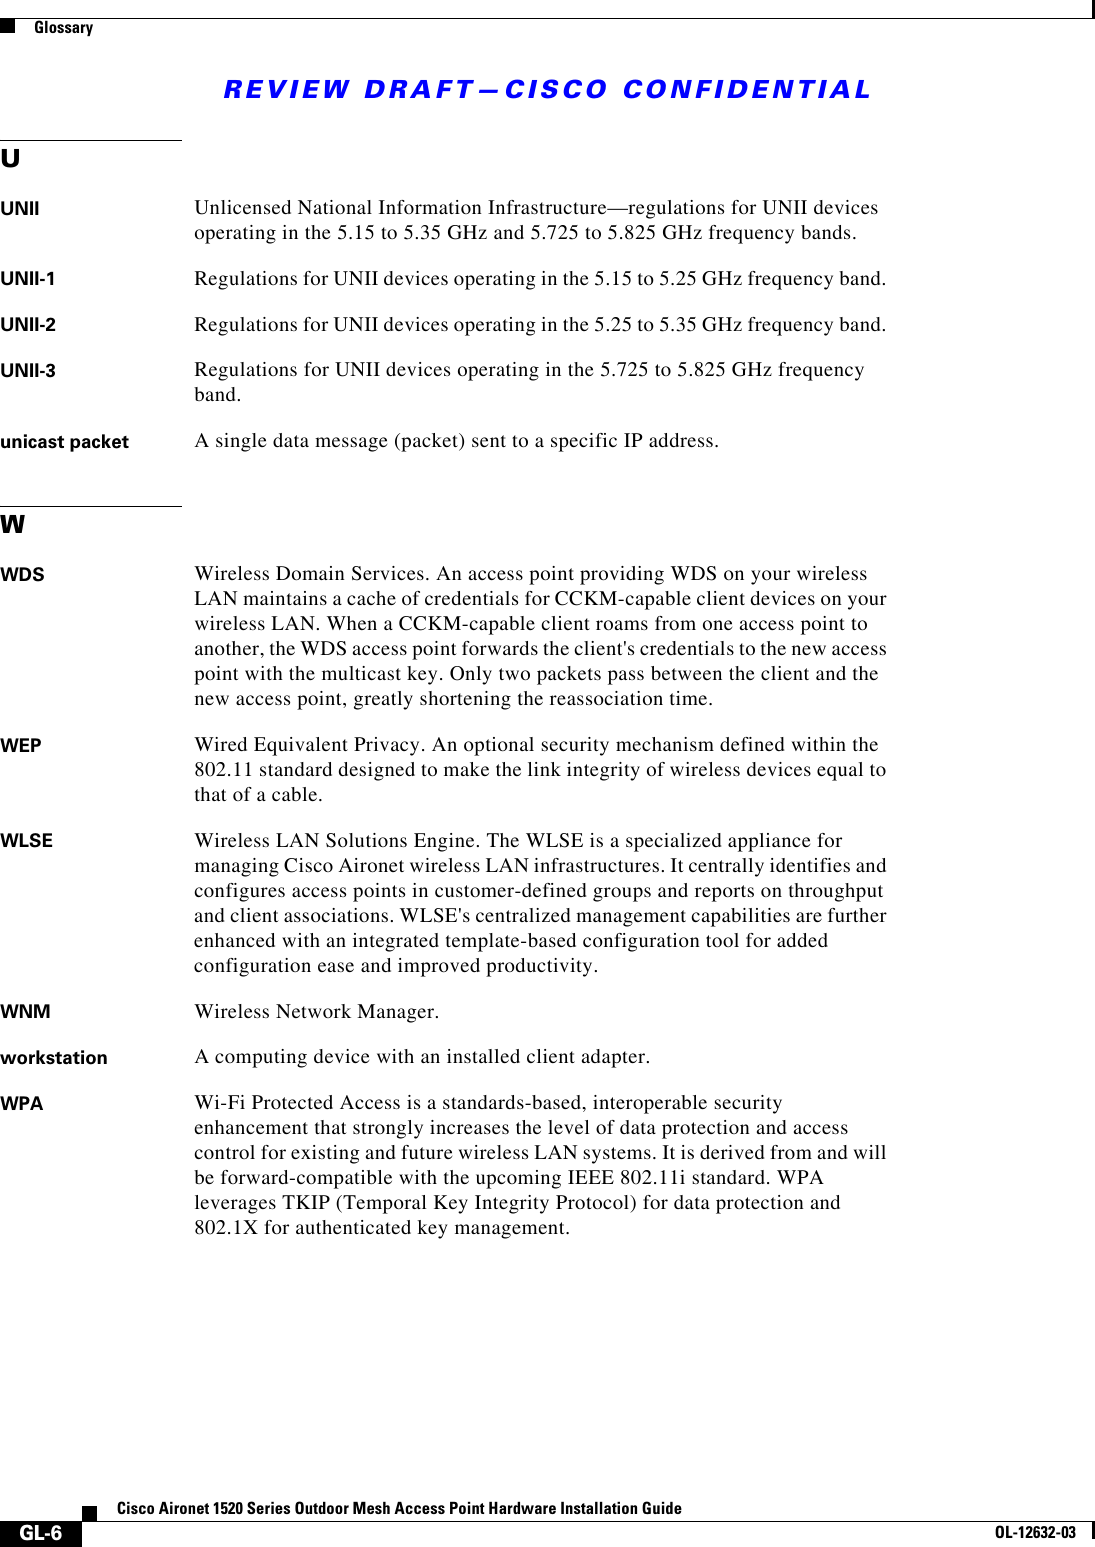 REVIEW DRAFT—CISCO CONFIDENTIALGlossaryGL-6Cisco Aironet 1520 Series Outdoor Mesh Access Point Hardware Installation GuideOL-12632-03UUNII Unlicensed National Information Infrastructure—regulations for UNII devices operating in the 5.15 to 5.35 GHz and 5.725 to 5.825 GHz frequency bands.UNII-1 Regulations for UNII devices operating in the 5.15 to 5.25 GHz frequency band.UNII-2 Regulations for UNII devices operating in the 5.25 to 5.35 GHz frequency band.UNII-3 Regulations for UNII devices operating in the 5.725 to 5.825 GHz frequency band.unicast packet A single data message (packet) sent to a specific IP address.WWDS Wireless Domain Services. An access point providing WDS on your wireless LAN maintains a cache of credentials for CCKM-capable client devices on your wireless LAN. When a CCKM-capable client roams from one access point to another, the WDS access point forwards the client&apos;s credentials to the new access point with the multicast key. Only two packets pass between the client and the new access point, greatly shortening the reassociation time. WEP Wired Equivalent Privacy. An optional security mechanism defined within the 802.11 standard designed to make the link integrity of wireless devices equal to that of a cable.WLSE Wireless LAN Solutions Engine. The WLSE is a specialized appliance for managing Cisco Aironet wireless LAN infrastructures. It centrally identifies and configures access points in customer-defined groups and reports on throughput and client associations. WLSE&apos;s centralized management capabilities are further enhanced with an integrated template-based configuration tool for added configuration ease and improved productivity. WNM Wireless Network Manager. workstation A computing device with an installed client adapter.WPA Wi-Fi Protected Access is a standards-based, interoperable security enhancement that strongly increases the level of data protection and access control for existing and future wireless LAN systems. It is derived from and will be forward-compatible with the upcoming IEEE 802.11i standard. WPA leverages TKIP (Temporal Key Integrity Protocol) for data protection and 802.1X for authenticated key management. 